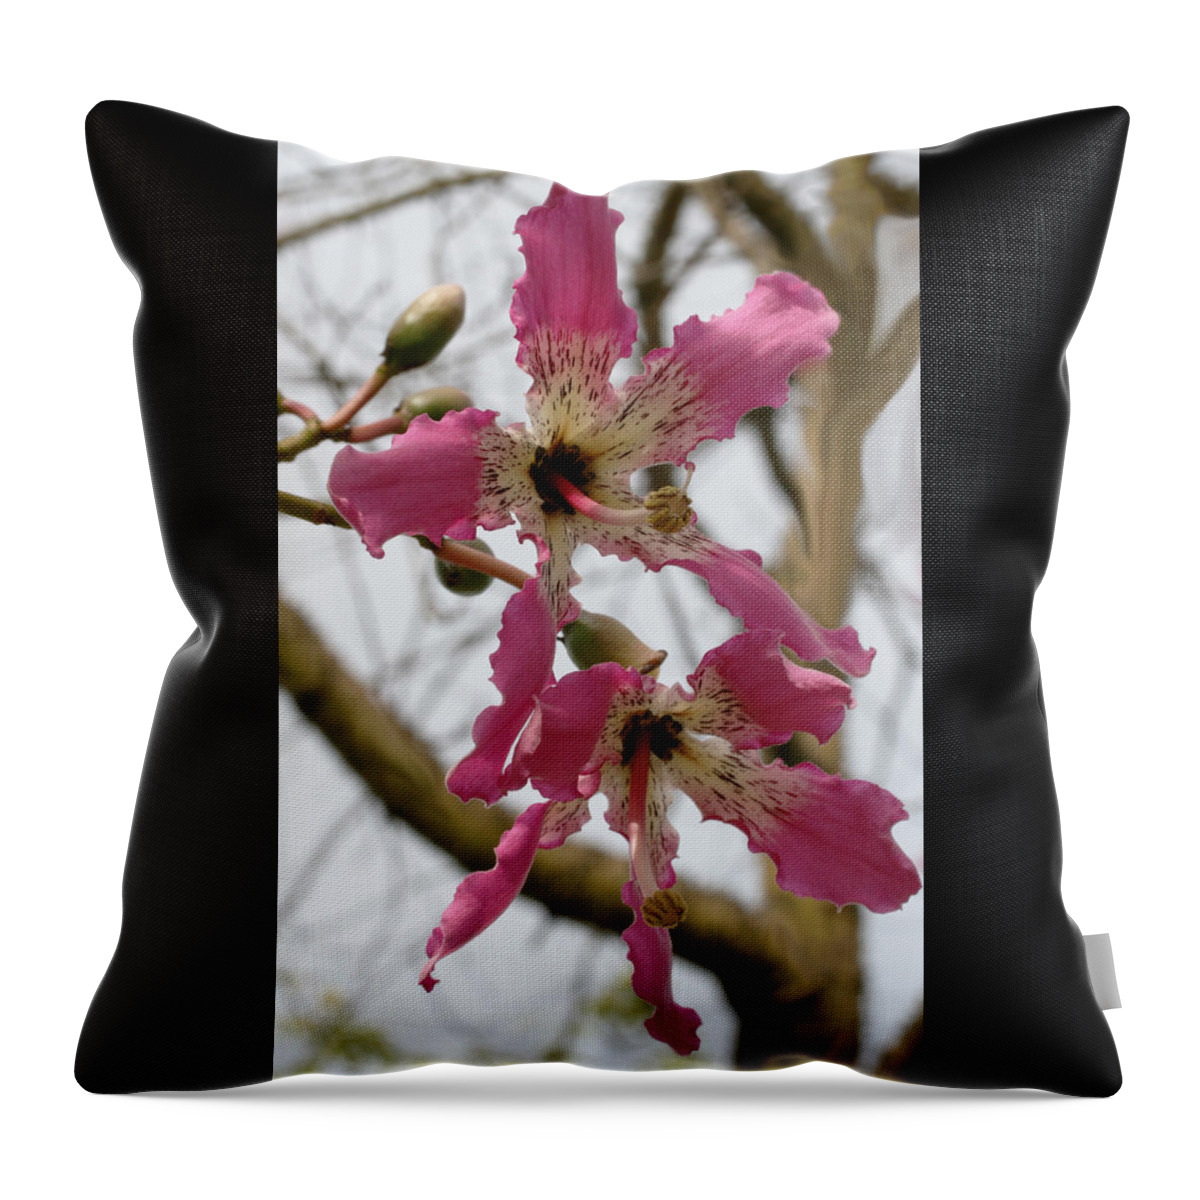 Charming Throw Pillow featuring the photograph Charming Desert Blooms by Tammy Pool